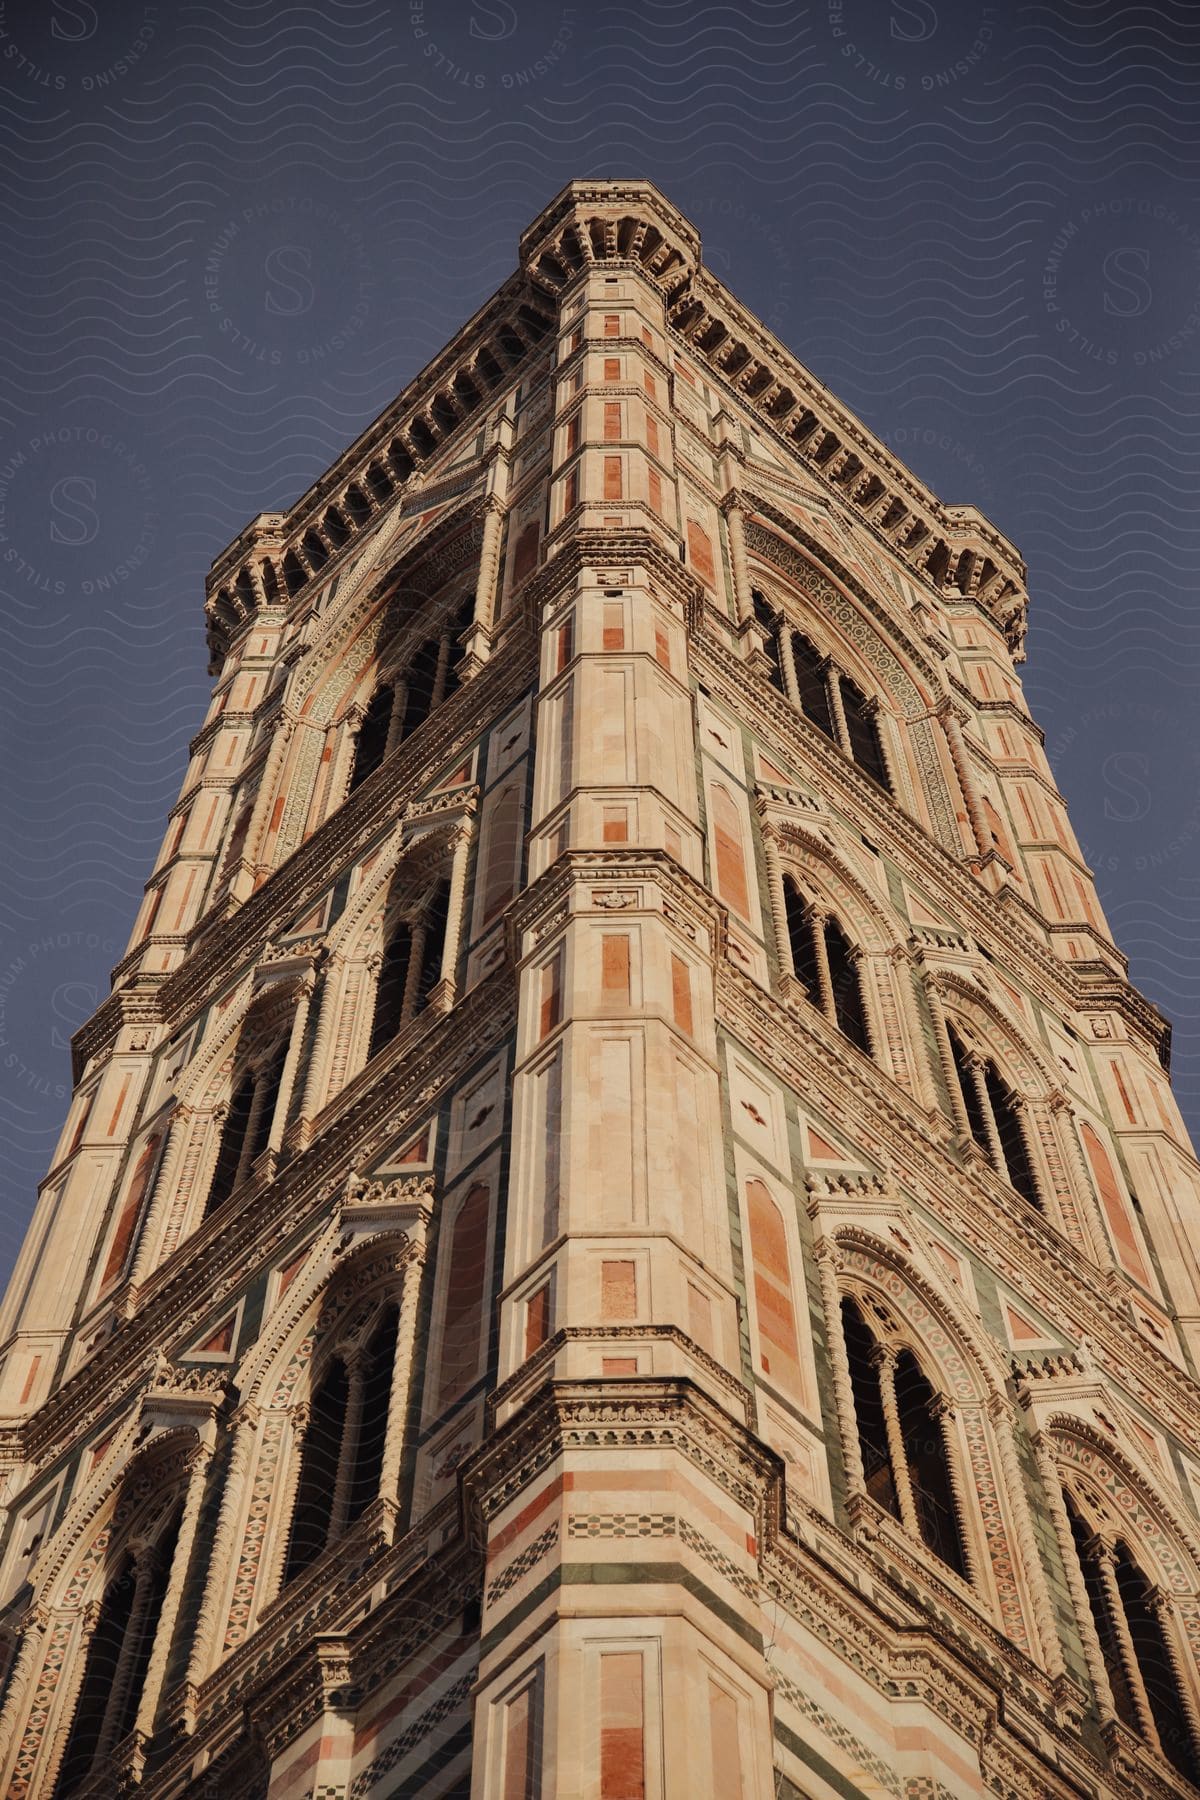 A tall building in a city part of the cathedral of santa maria del fiore in florence